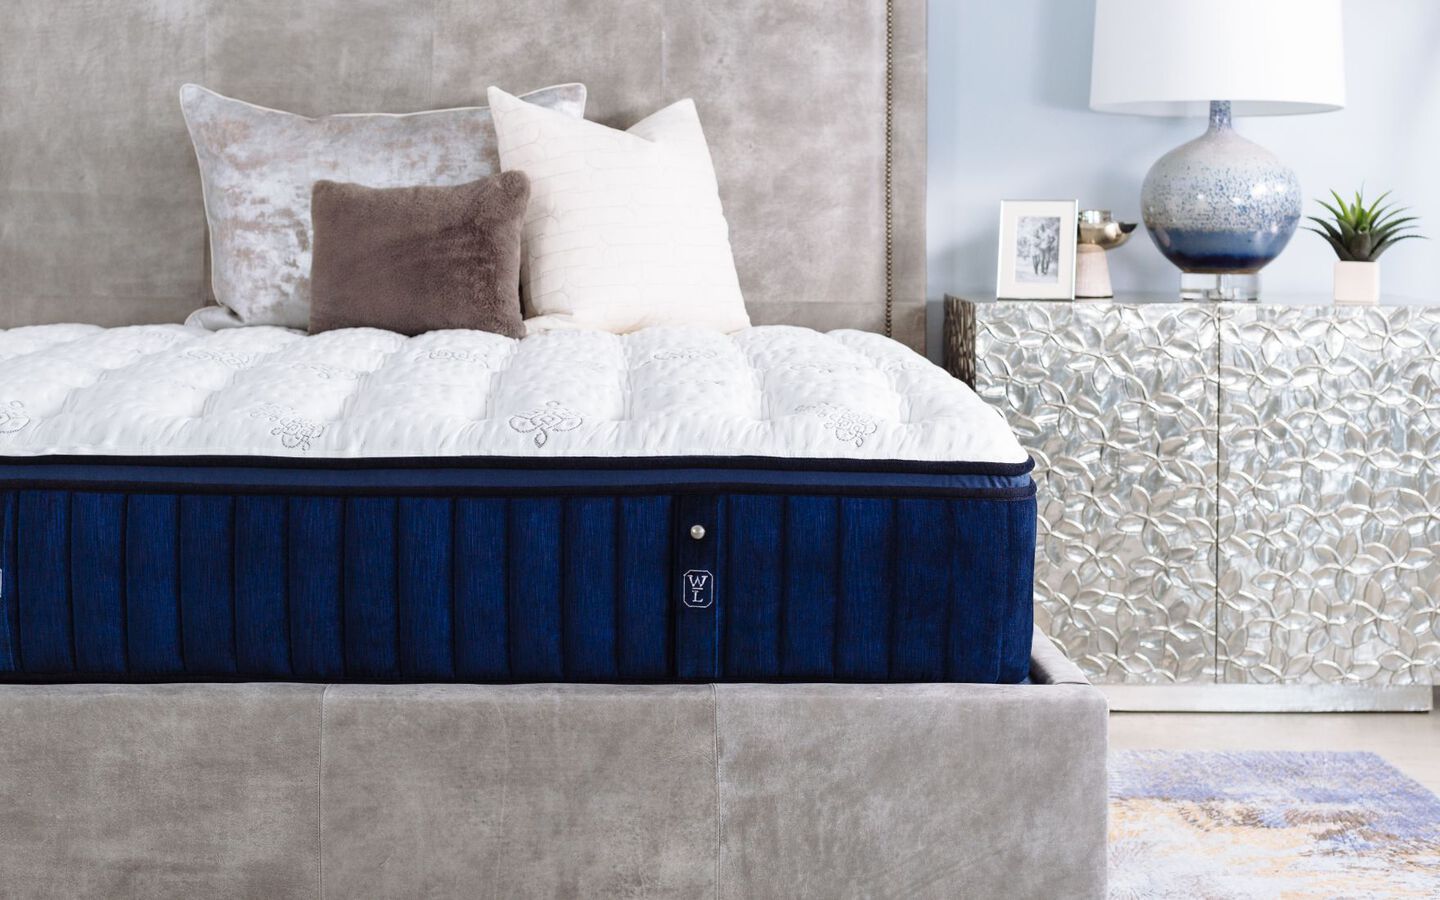 Navy blue and white William & Lawrence mattress next to a silver nightstand